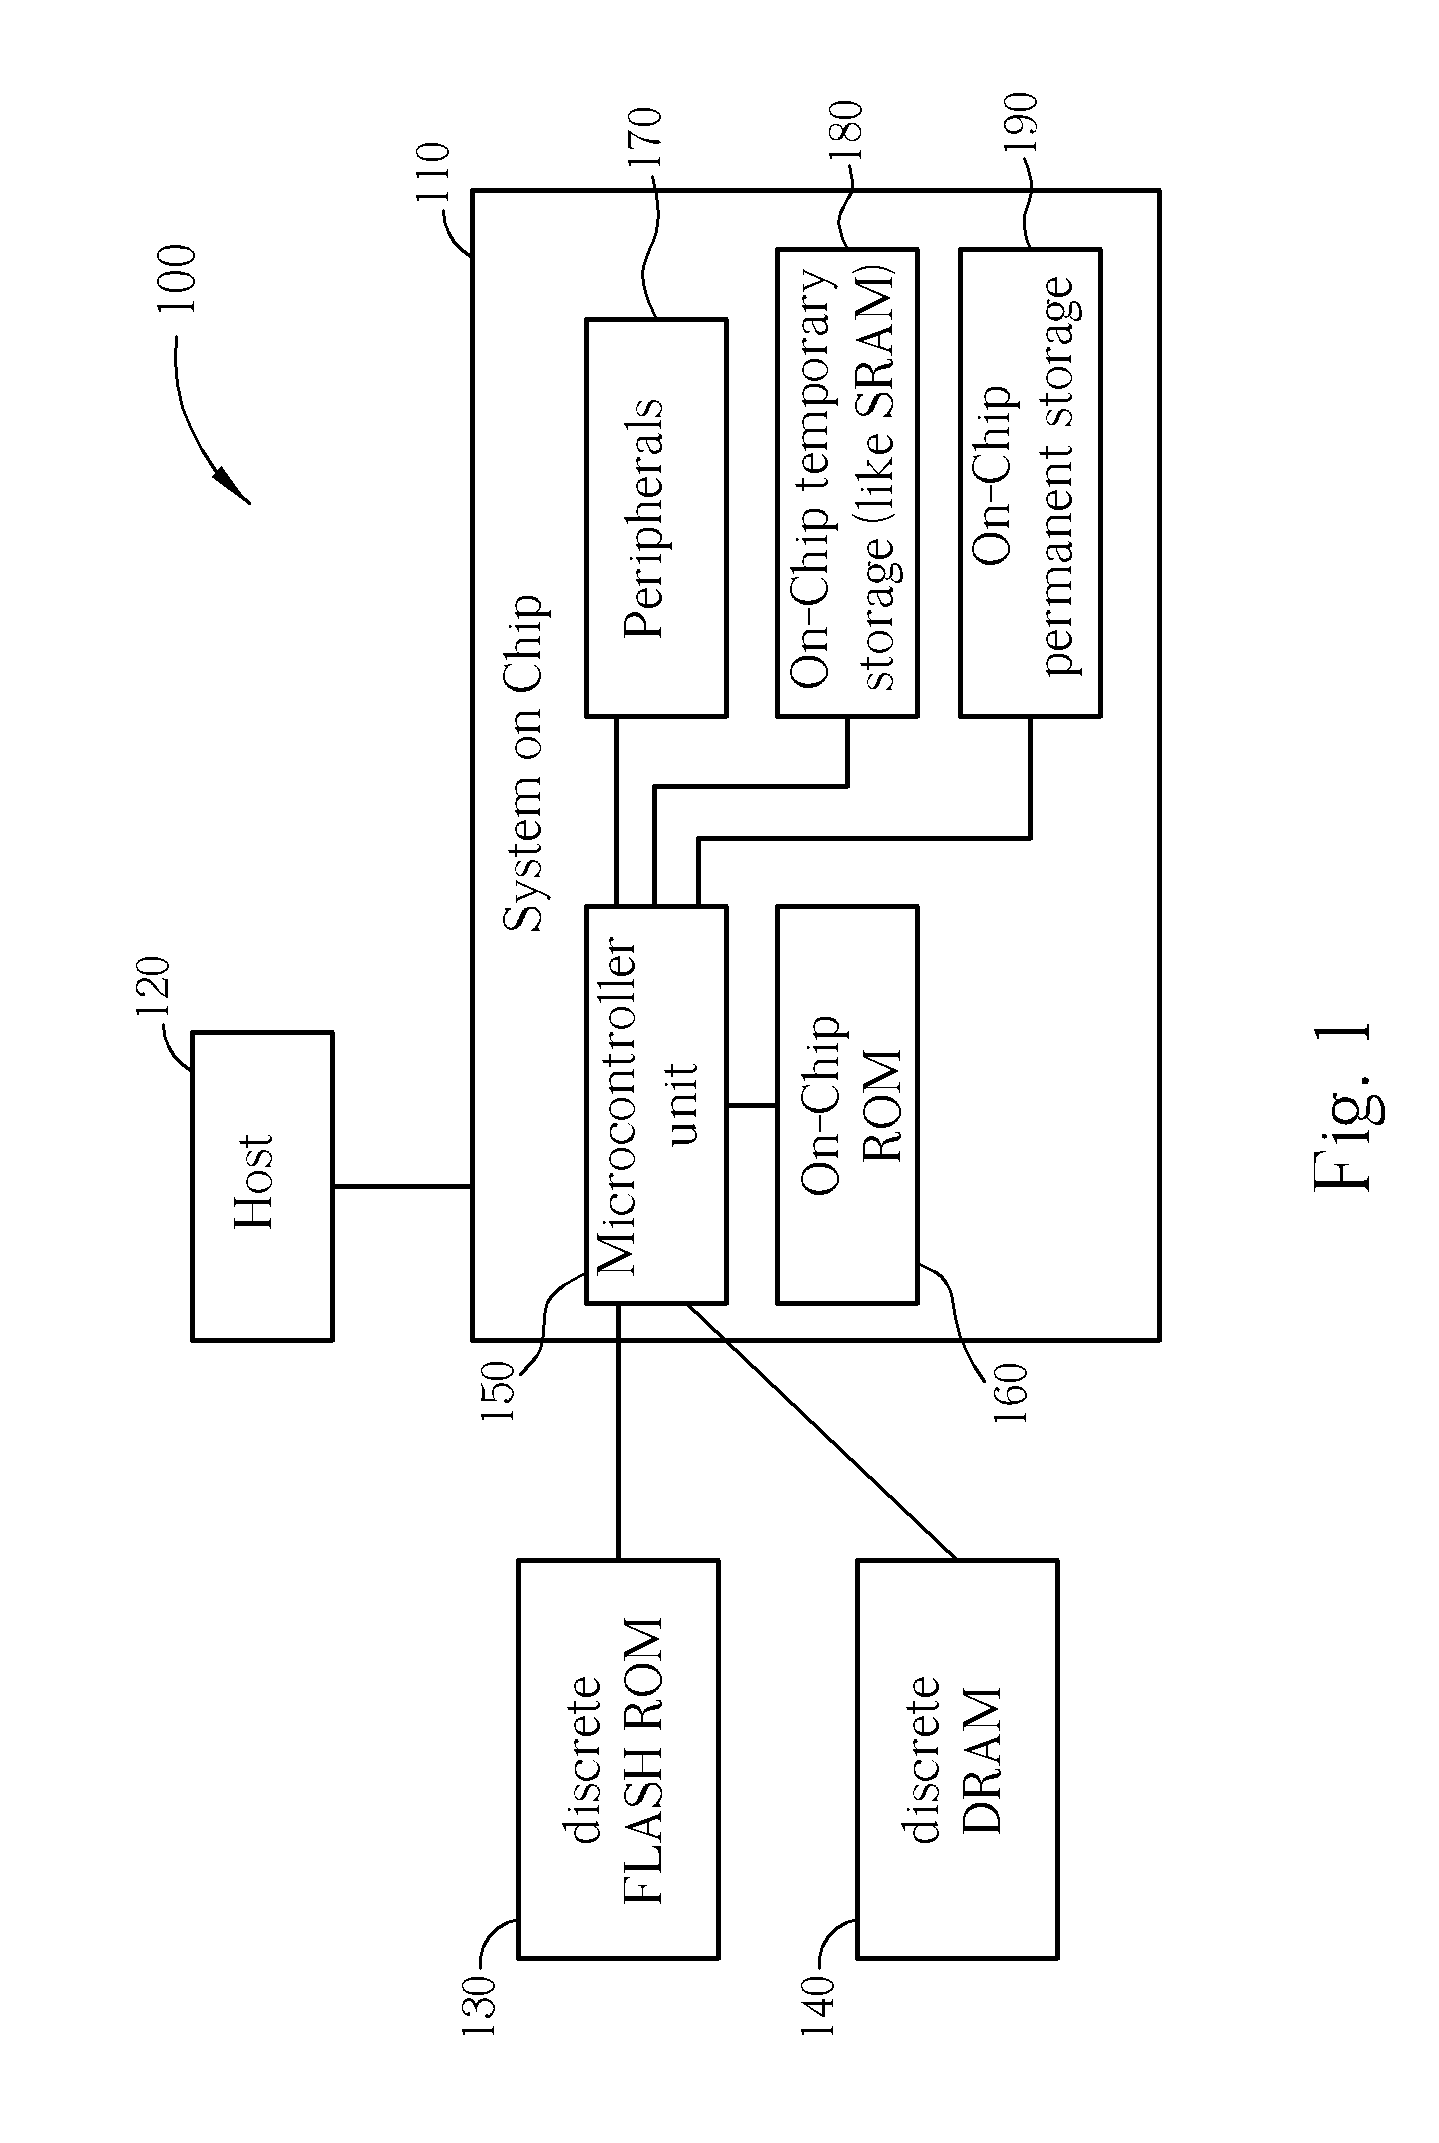 Embedded system insuring security and integrity, and method of increasing security thereof